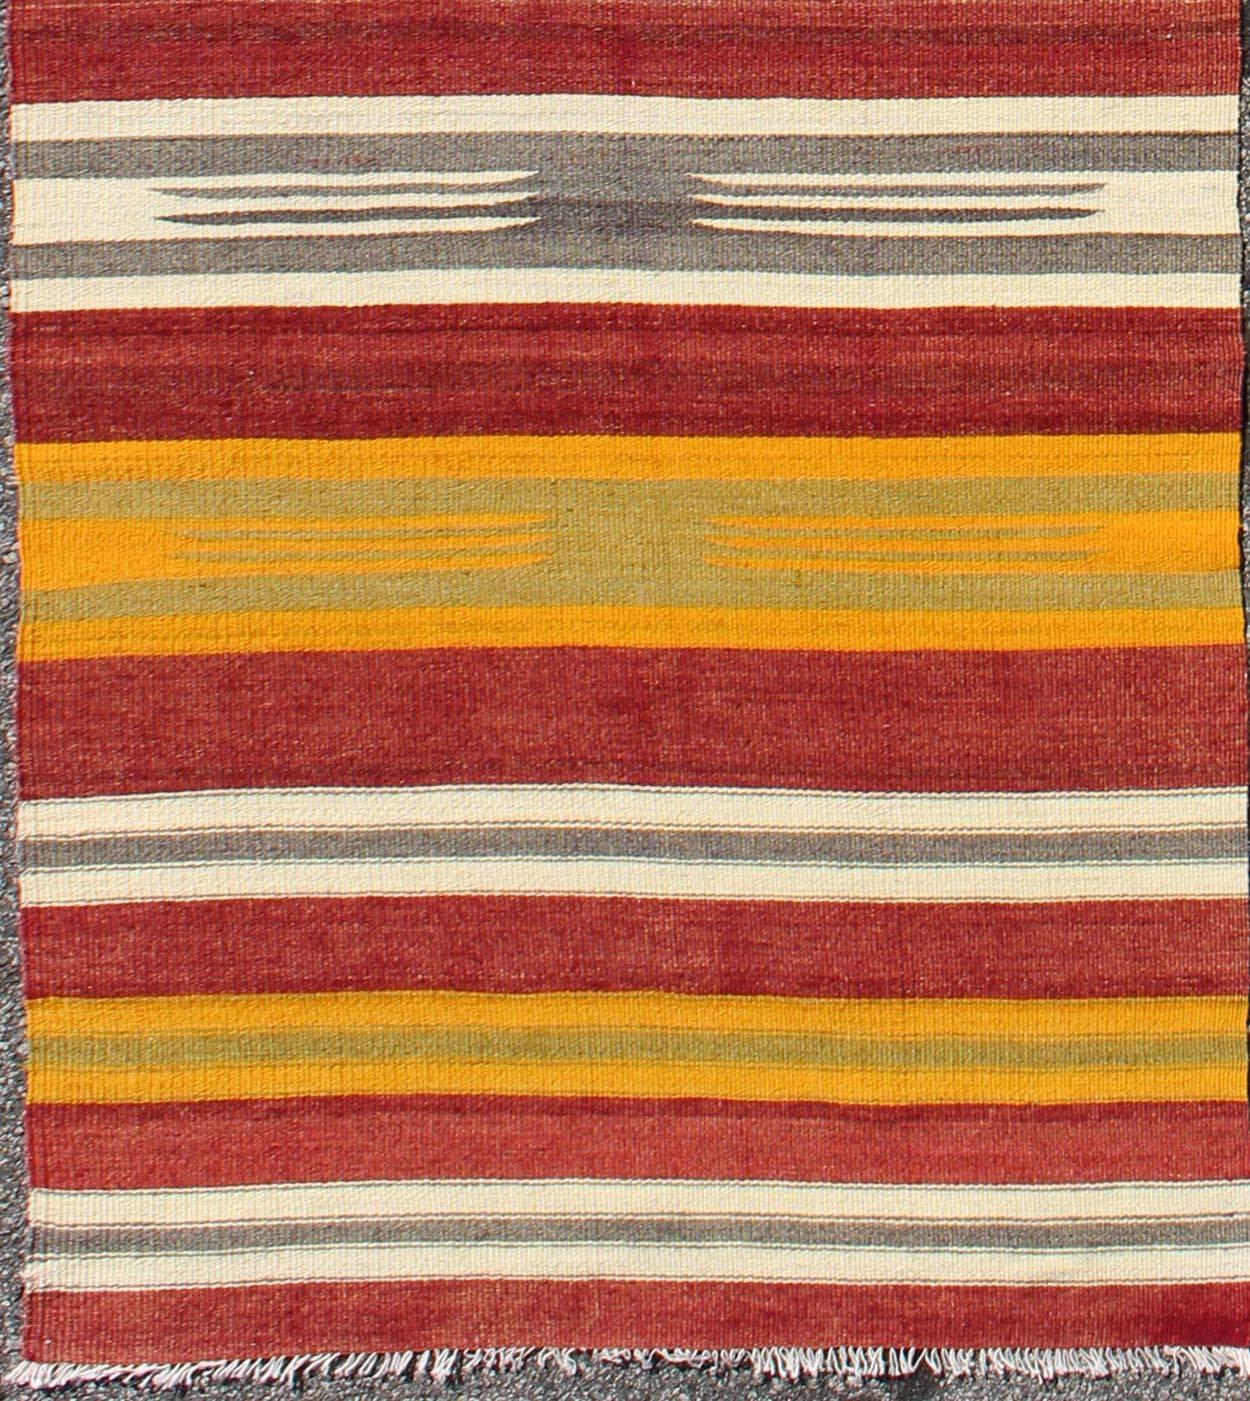 Vintage Turkish Kilim runner with stripes in red, green, yellow, ivory, gray, rug ned-145, country of origin / type: Turkey / Kilim, circa mid-20th century.

Woven during the mid-20th century in Turkey, this designer Kilim is decorated with a